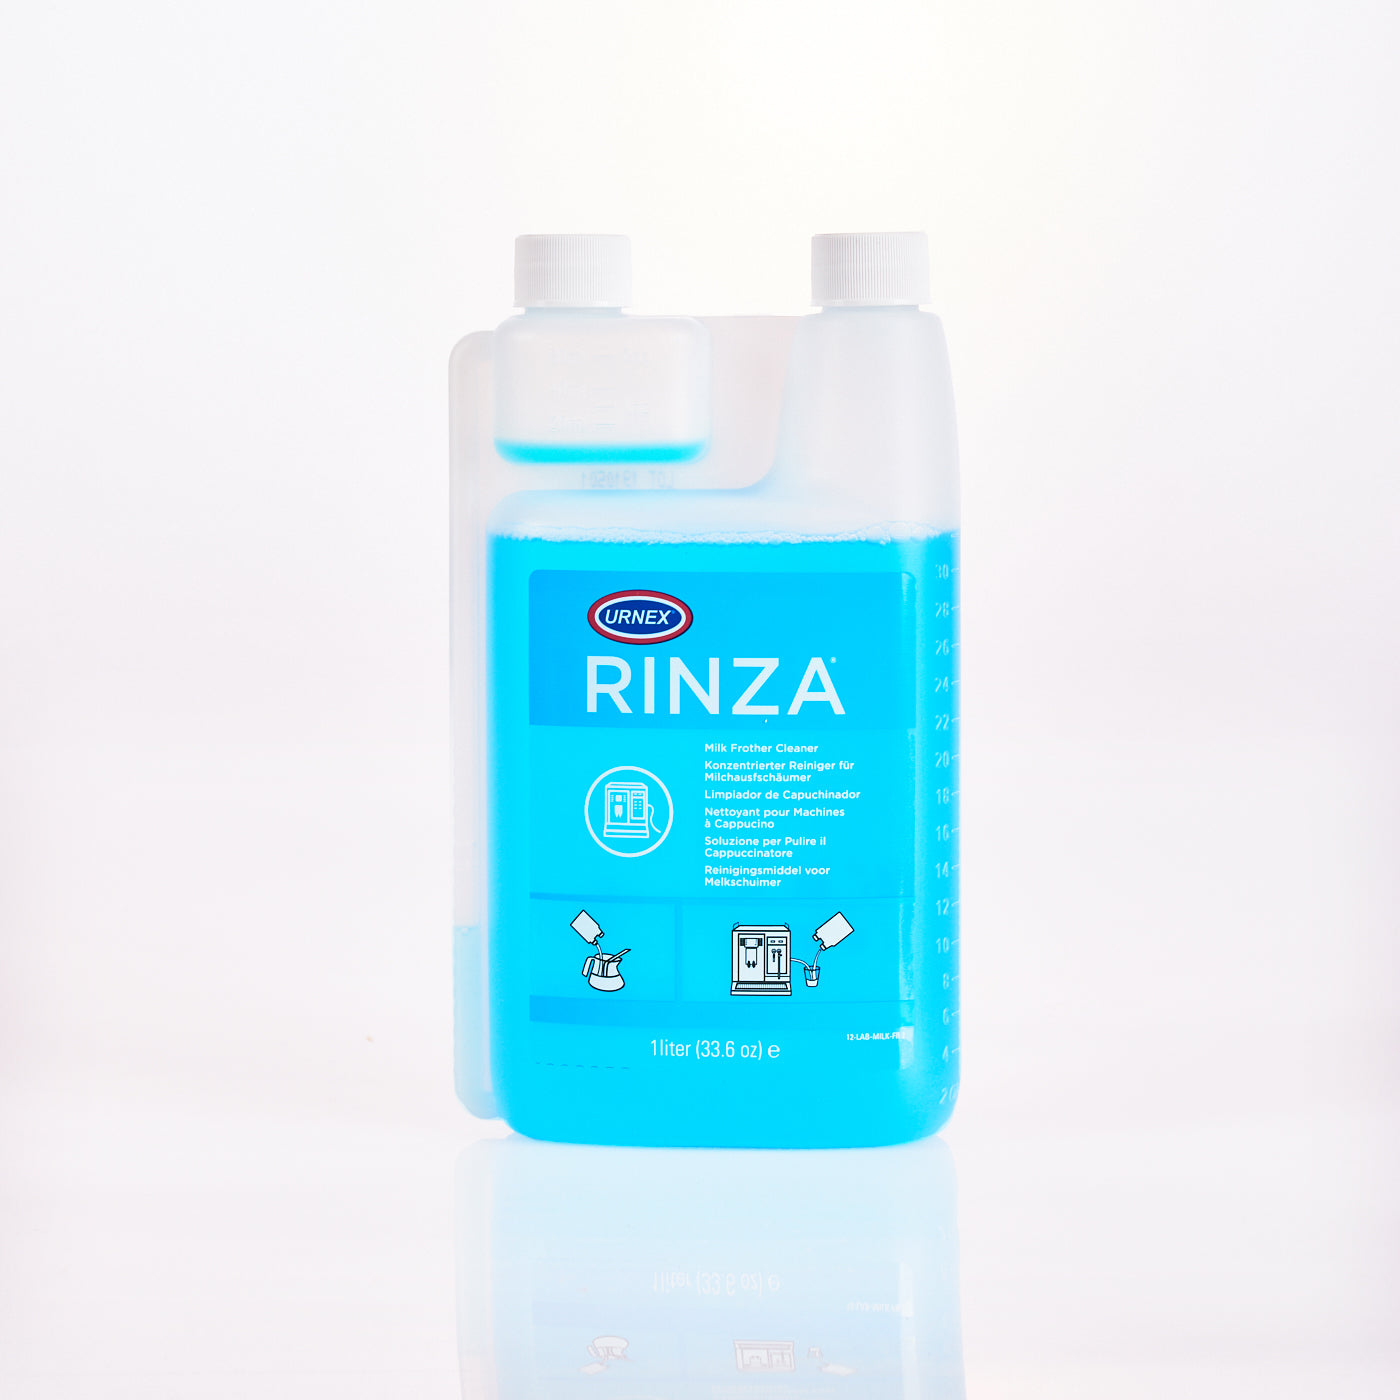 Rinza Milk Frother Cleaner (32oz/6cs)